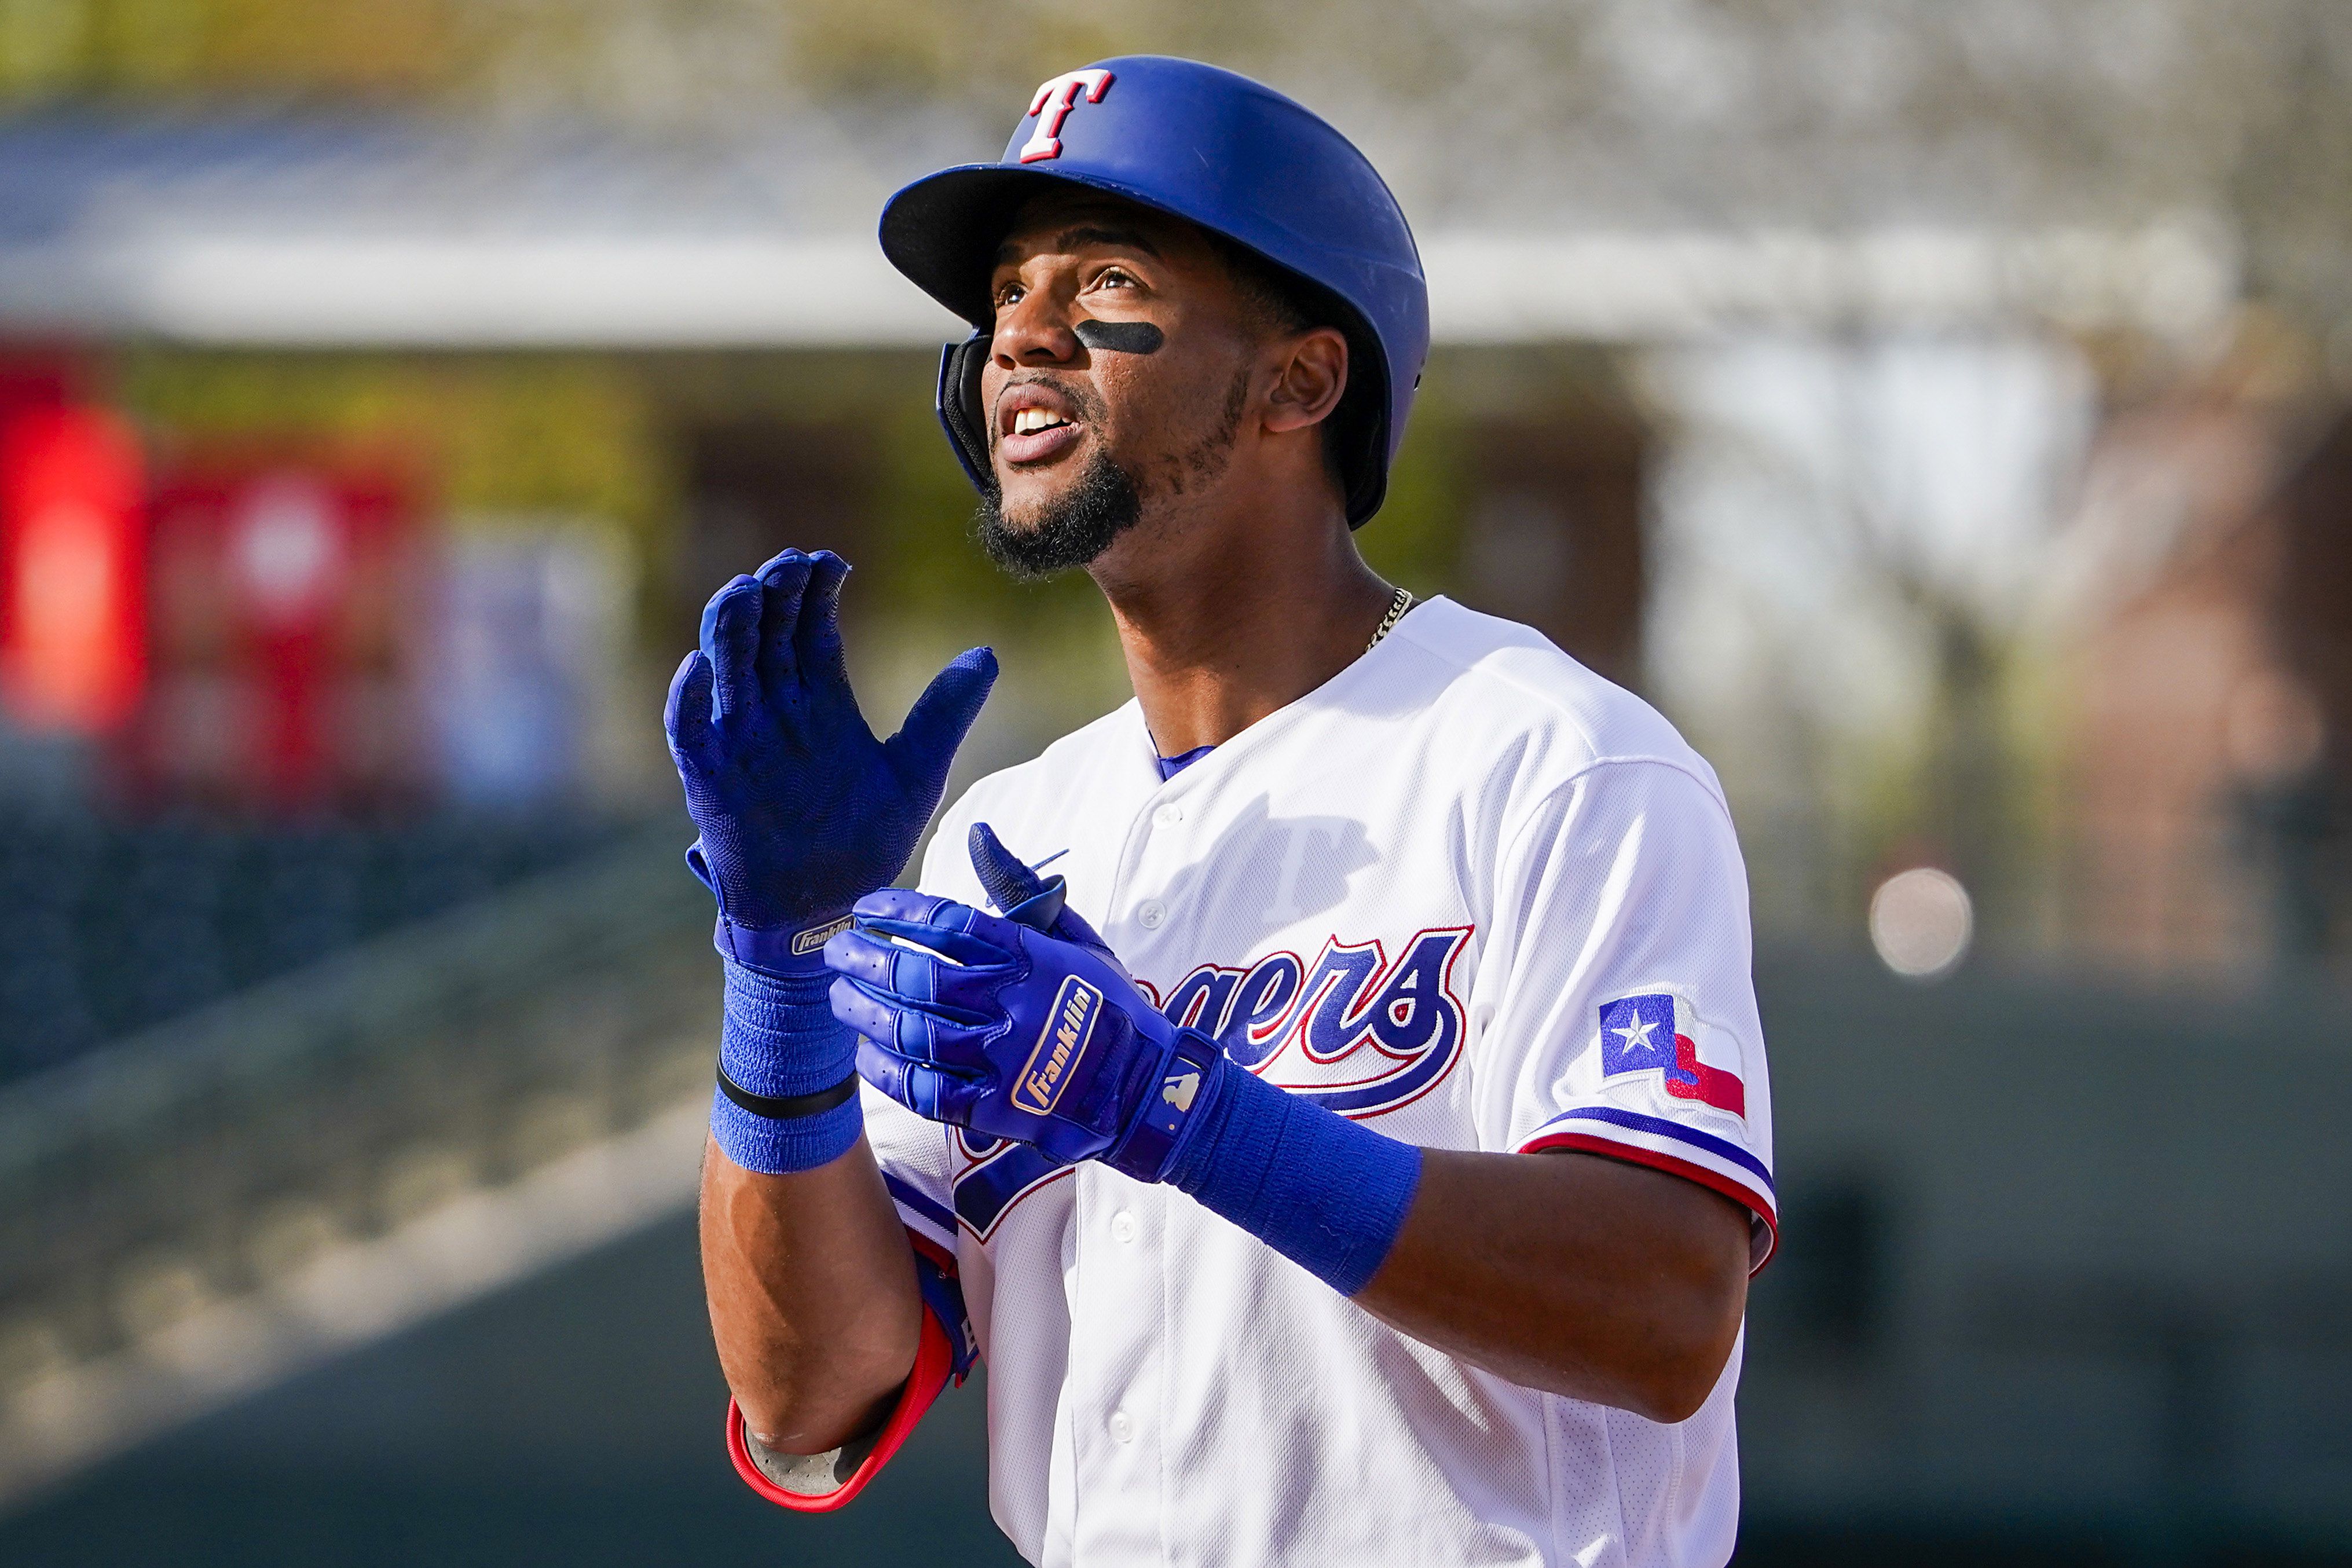 Scouting the Rangers' top prospects, No. 3: Why CF Leody Taveras